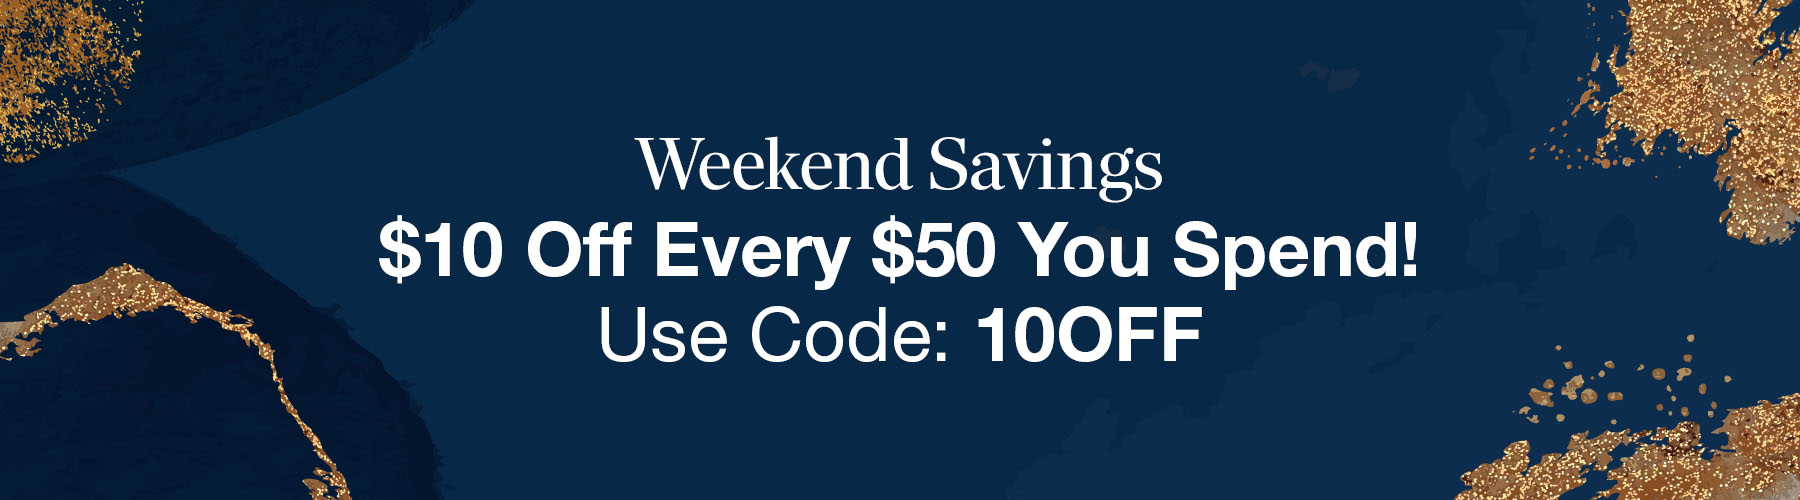 Weekend Savings
$10 off Every $50

With 10OFF